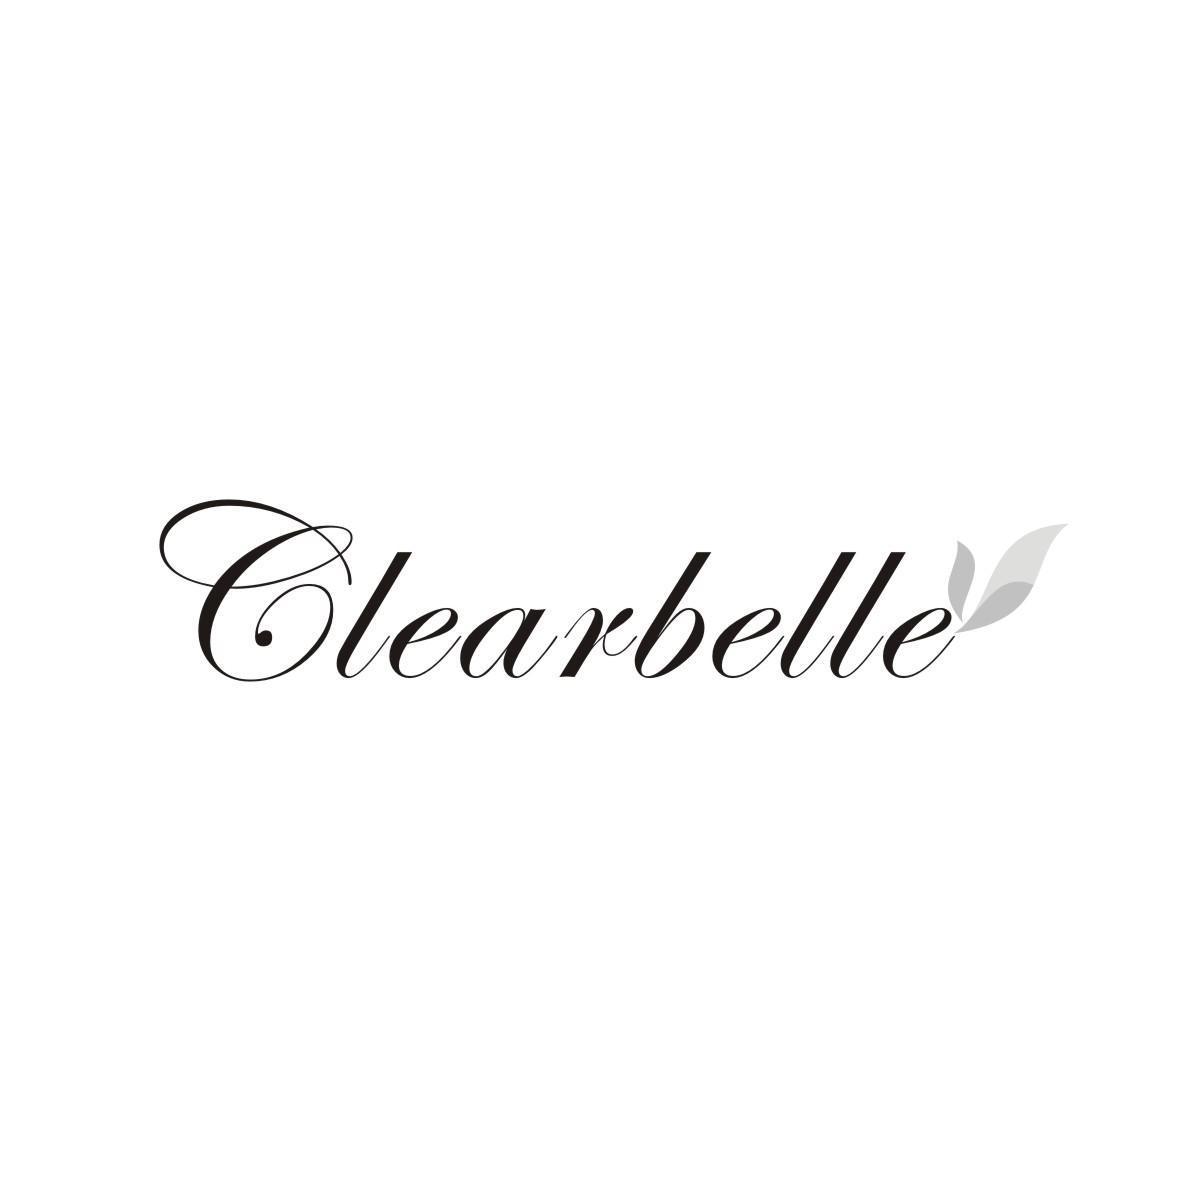 v-17096 CLEARBELLE